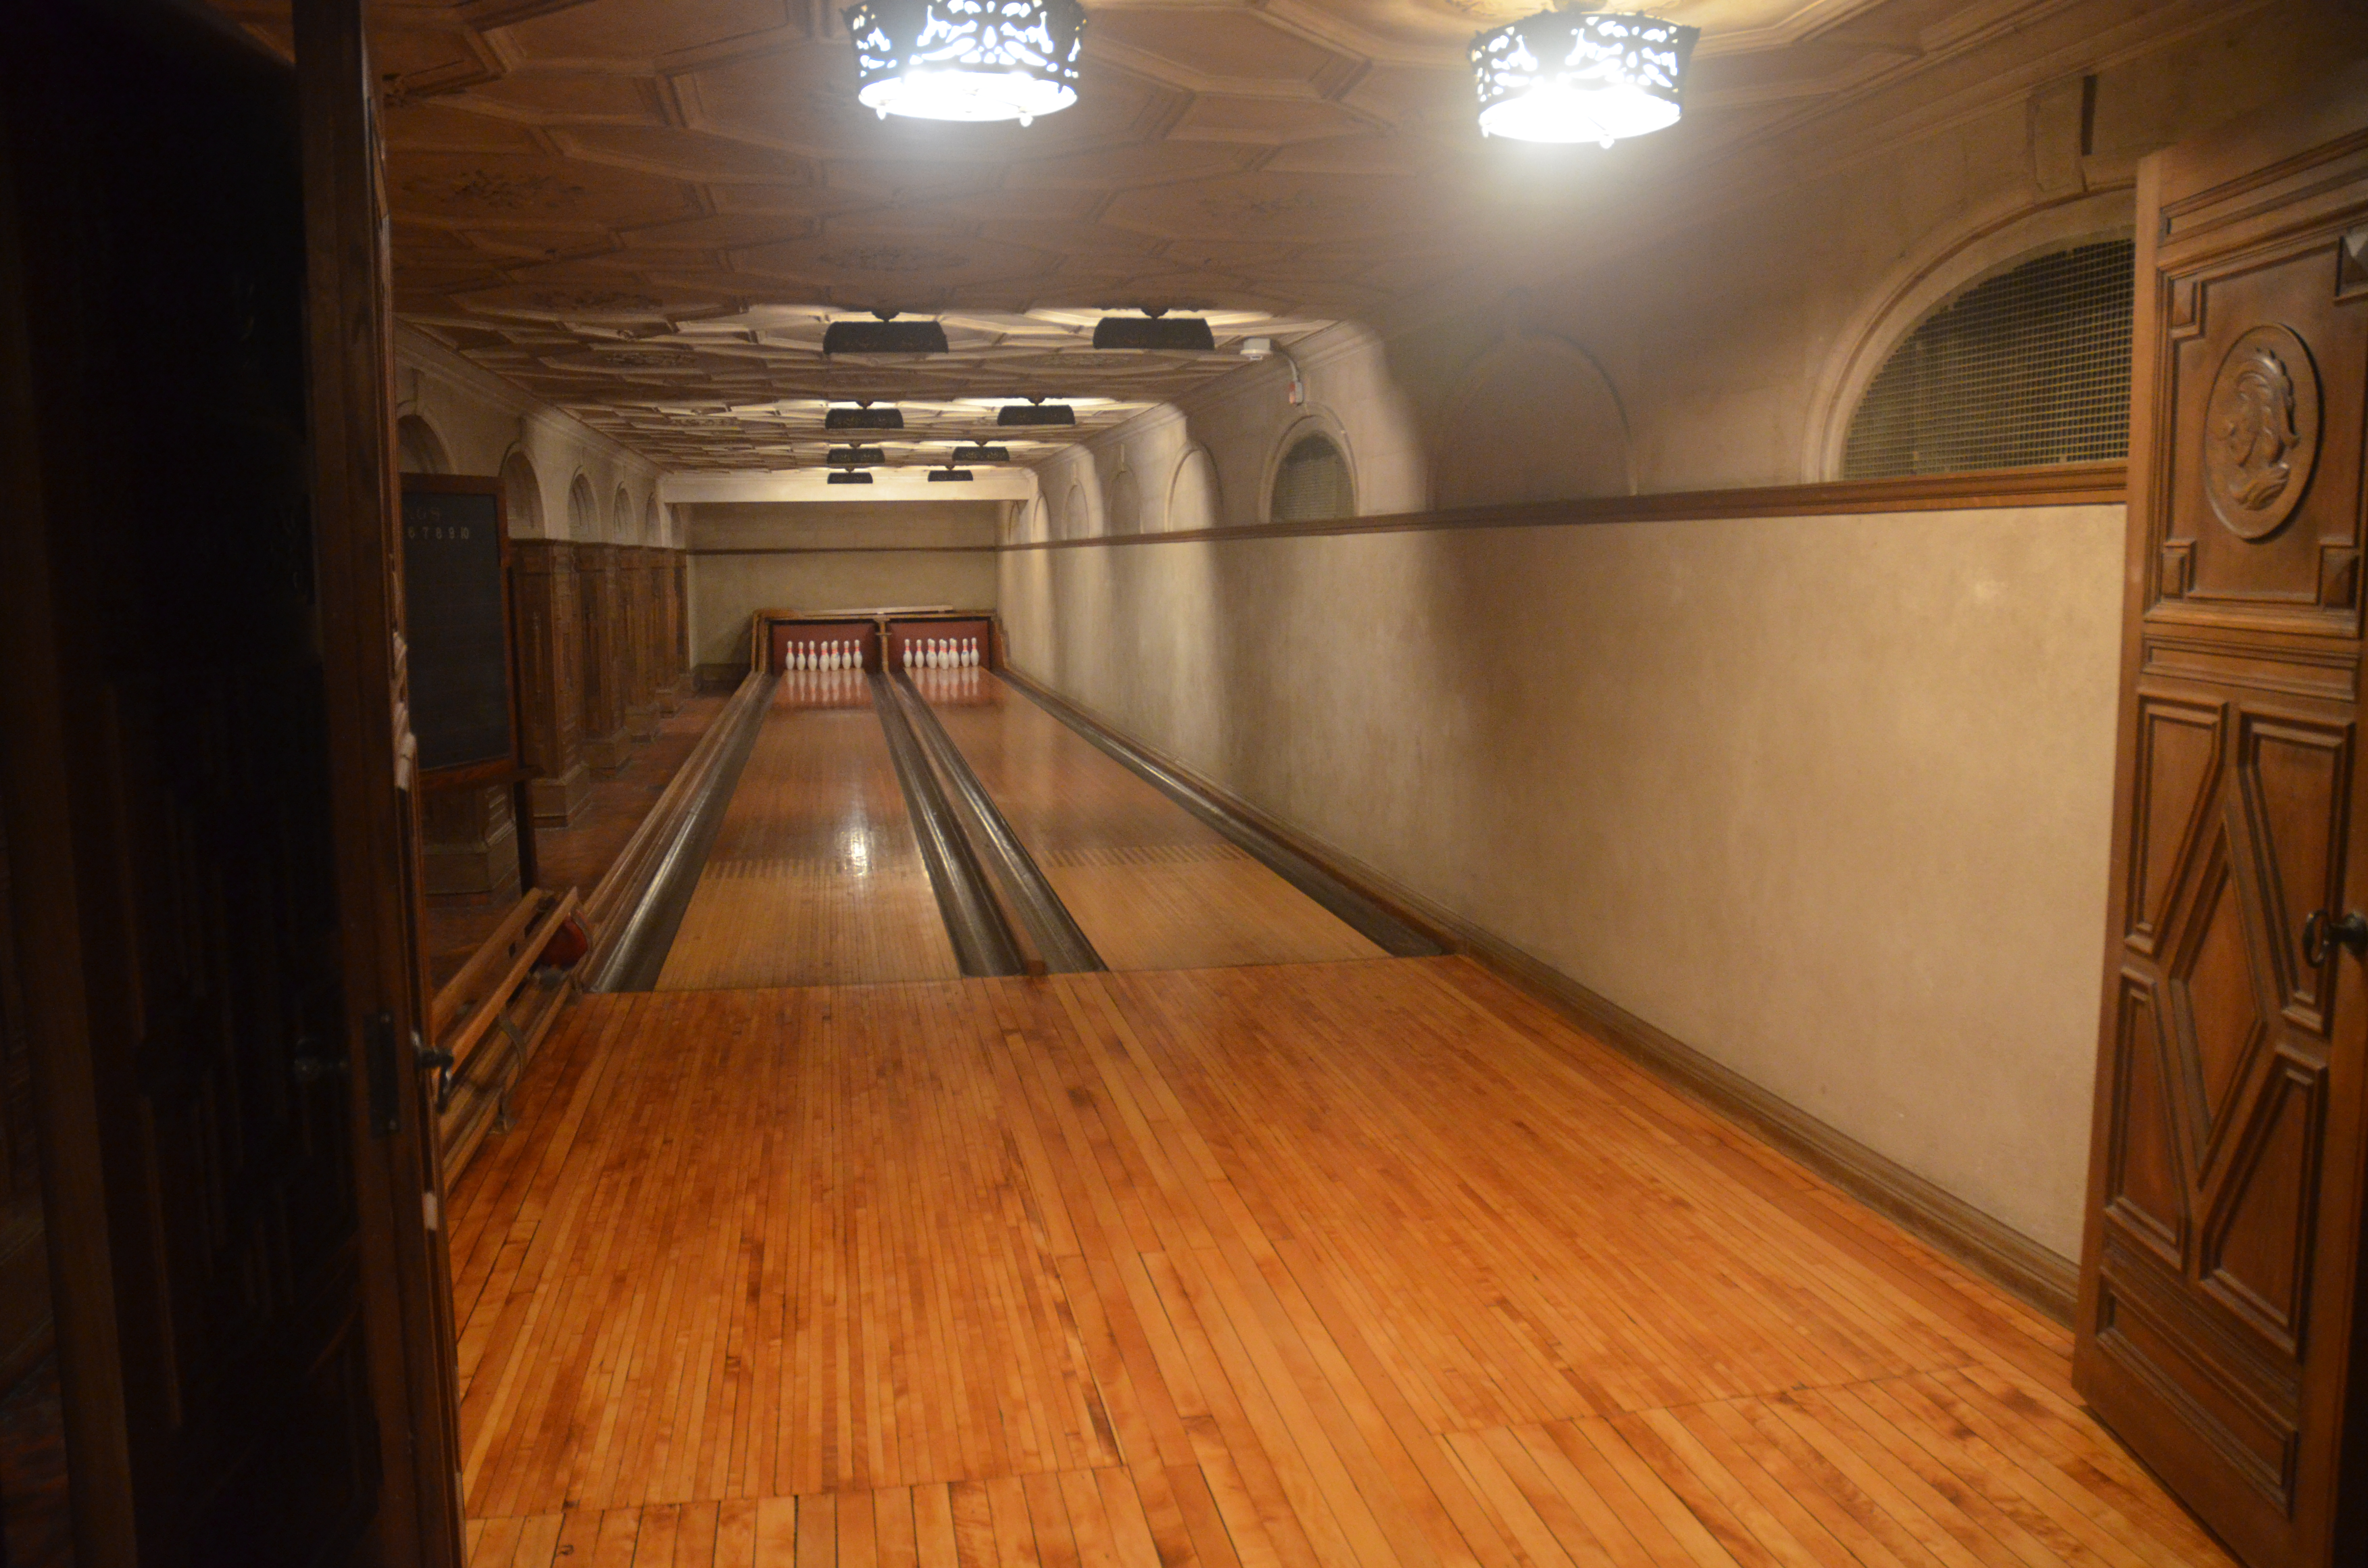 The bowling alley at the Frick Collection as seen in late 2012 (credit: Evan Bindelglass / CBSNewYork)